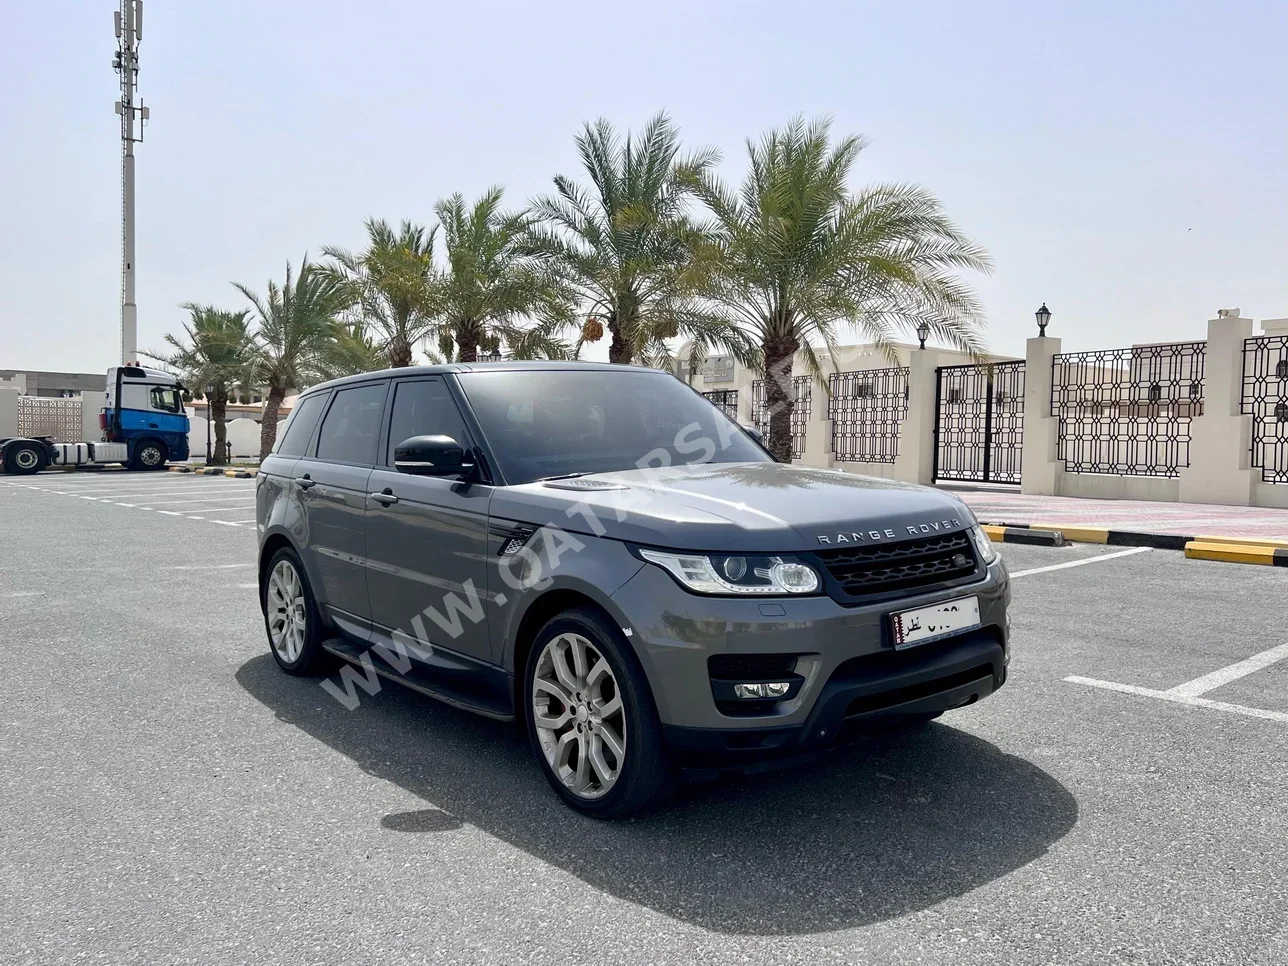 Land Rover  Range Rover  Sport Super charged  2015  Automatic  205,000 Km  8 Cylinder  Four Wheel Drive (4WD)  SUV  Gray